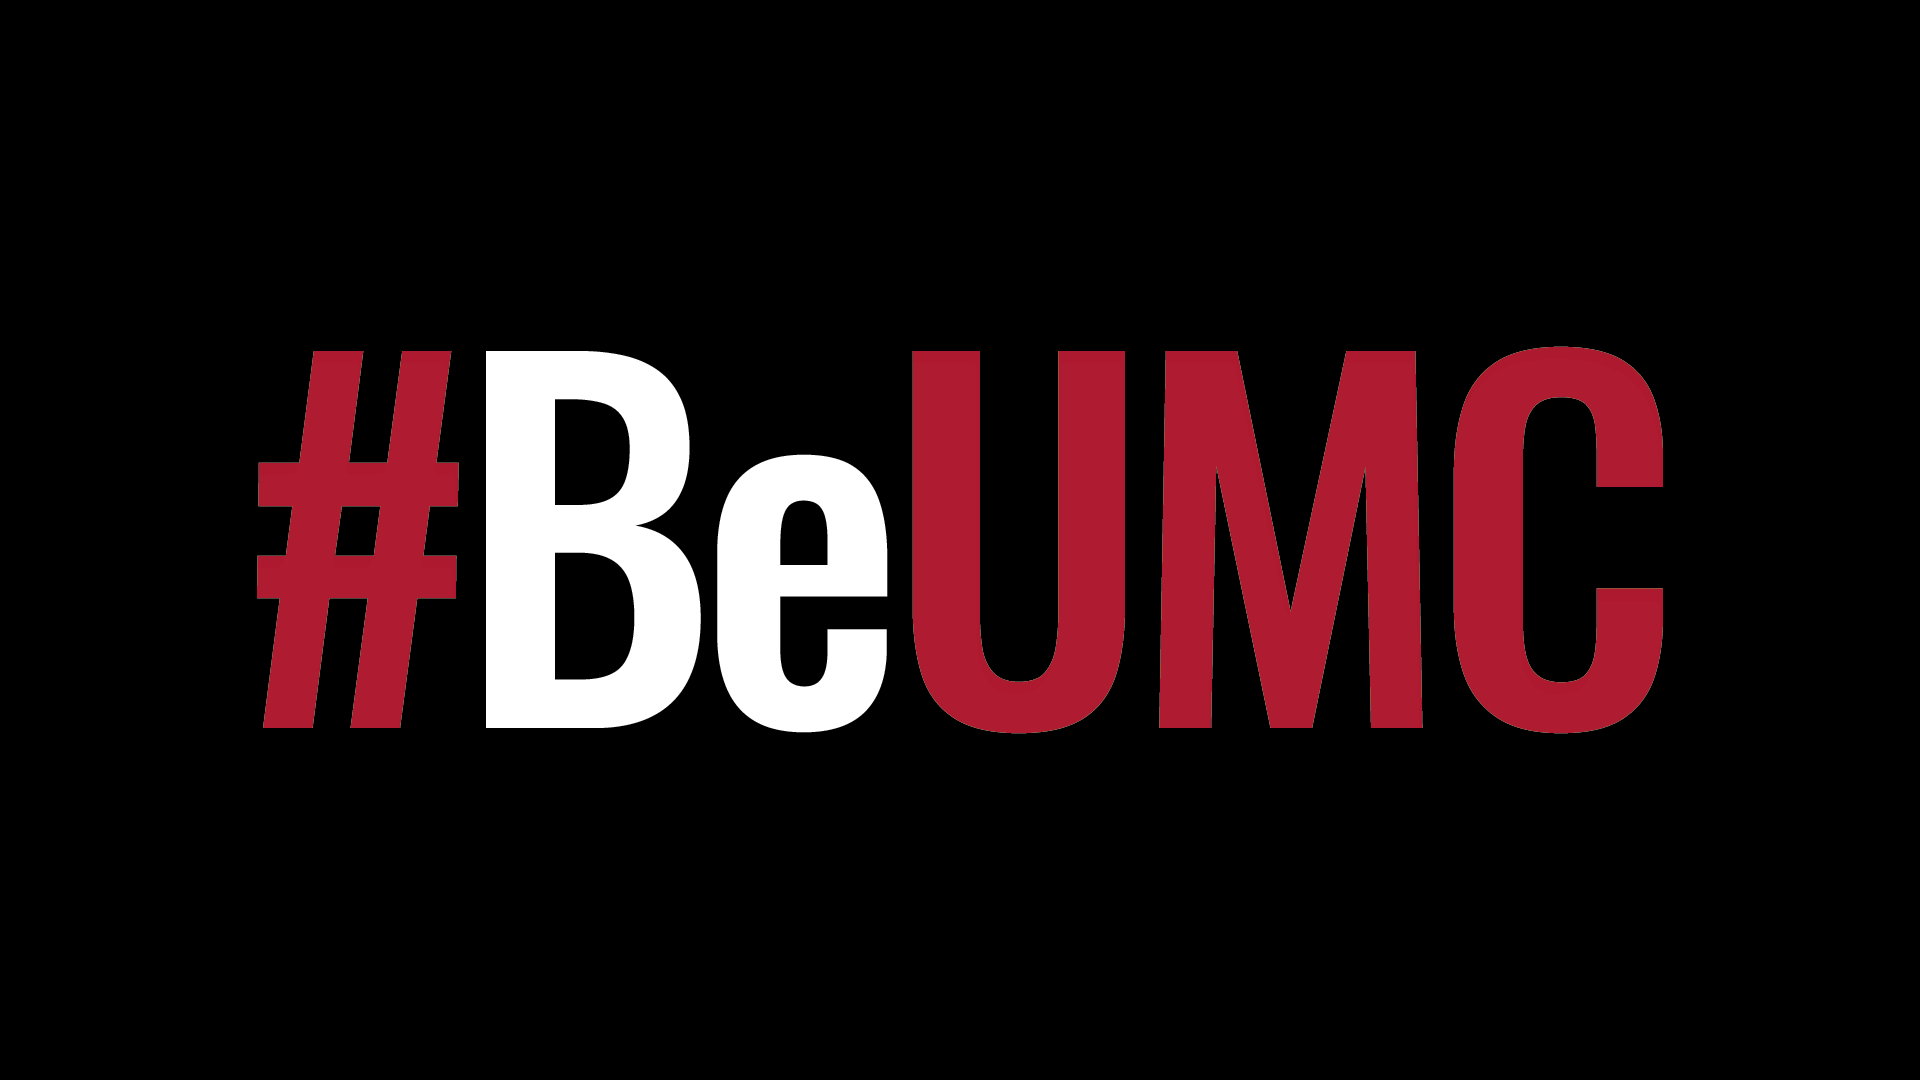 The #BeUMC campaign reminds us of who we are at our best. As people of God called The United Methodist Church, we’re faithful followers of Jesus seeking to make the world a better place. #BeUMC black and red logo on white background (1920x1080). 